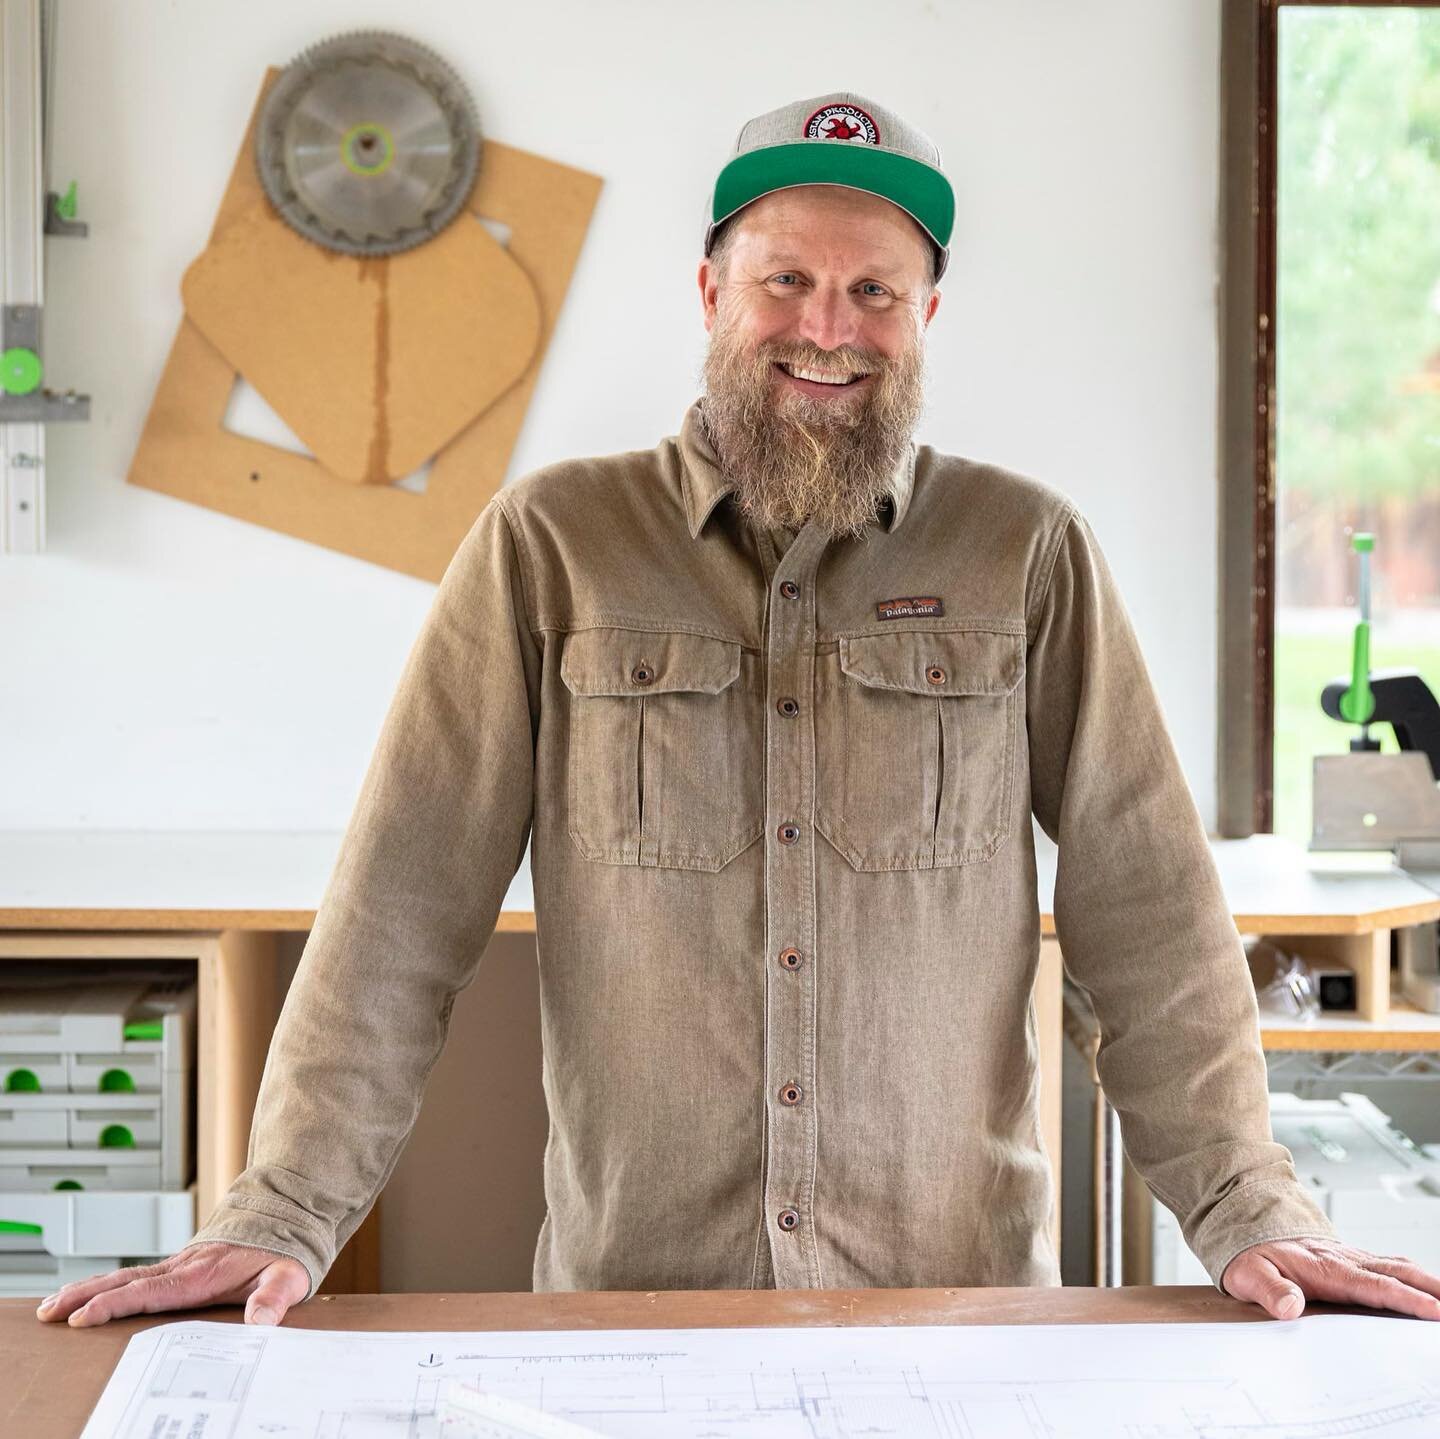 Bozeman is full of talented artists and Jeff Cook at CookStar Productions is one of them.

@cookstarproductions is a progressive building company creating unique, meaningful, handcrafted living spaces that are one-of-a-kind.

We captured images of Je